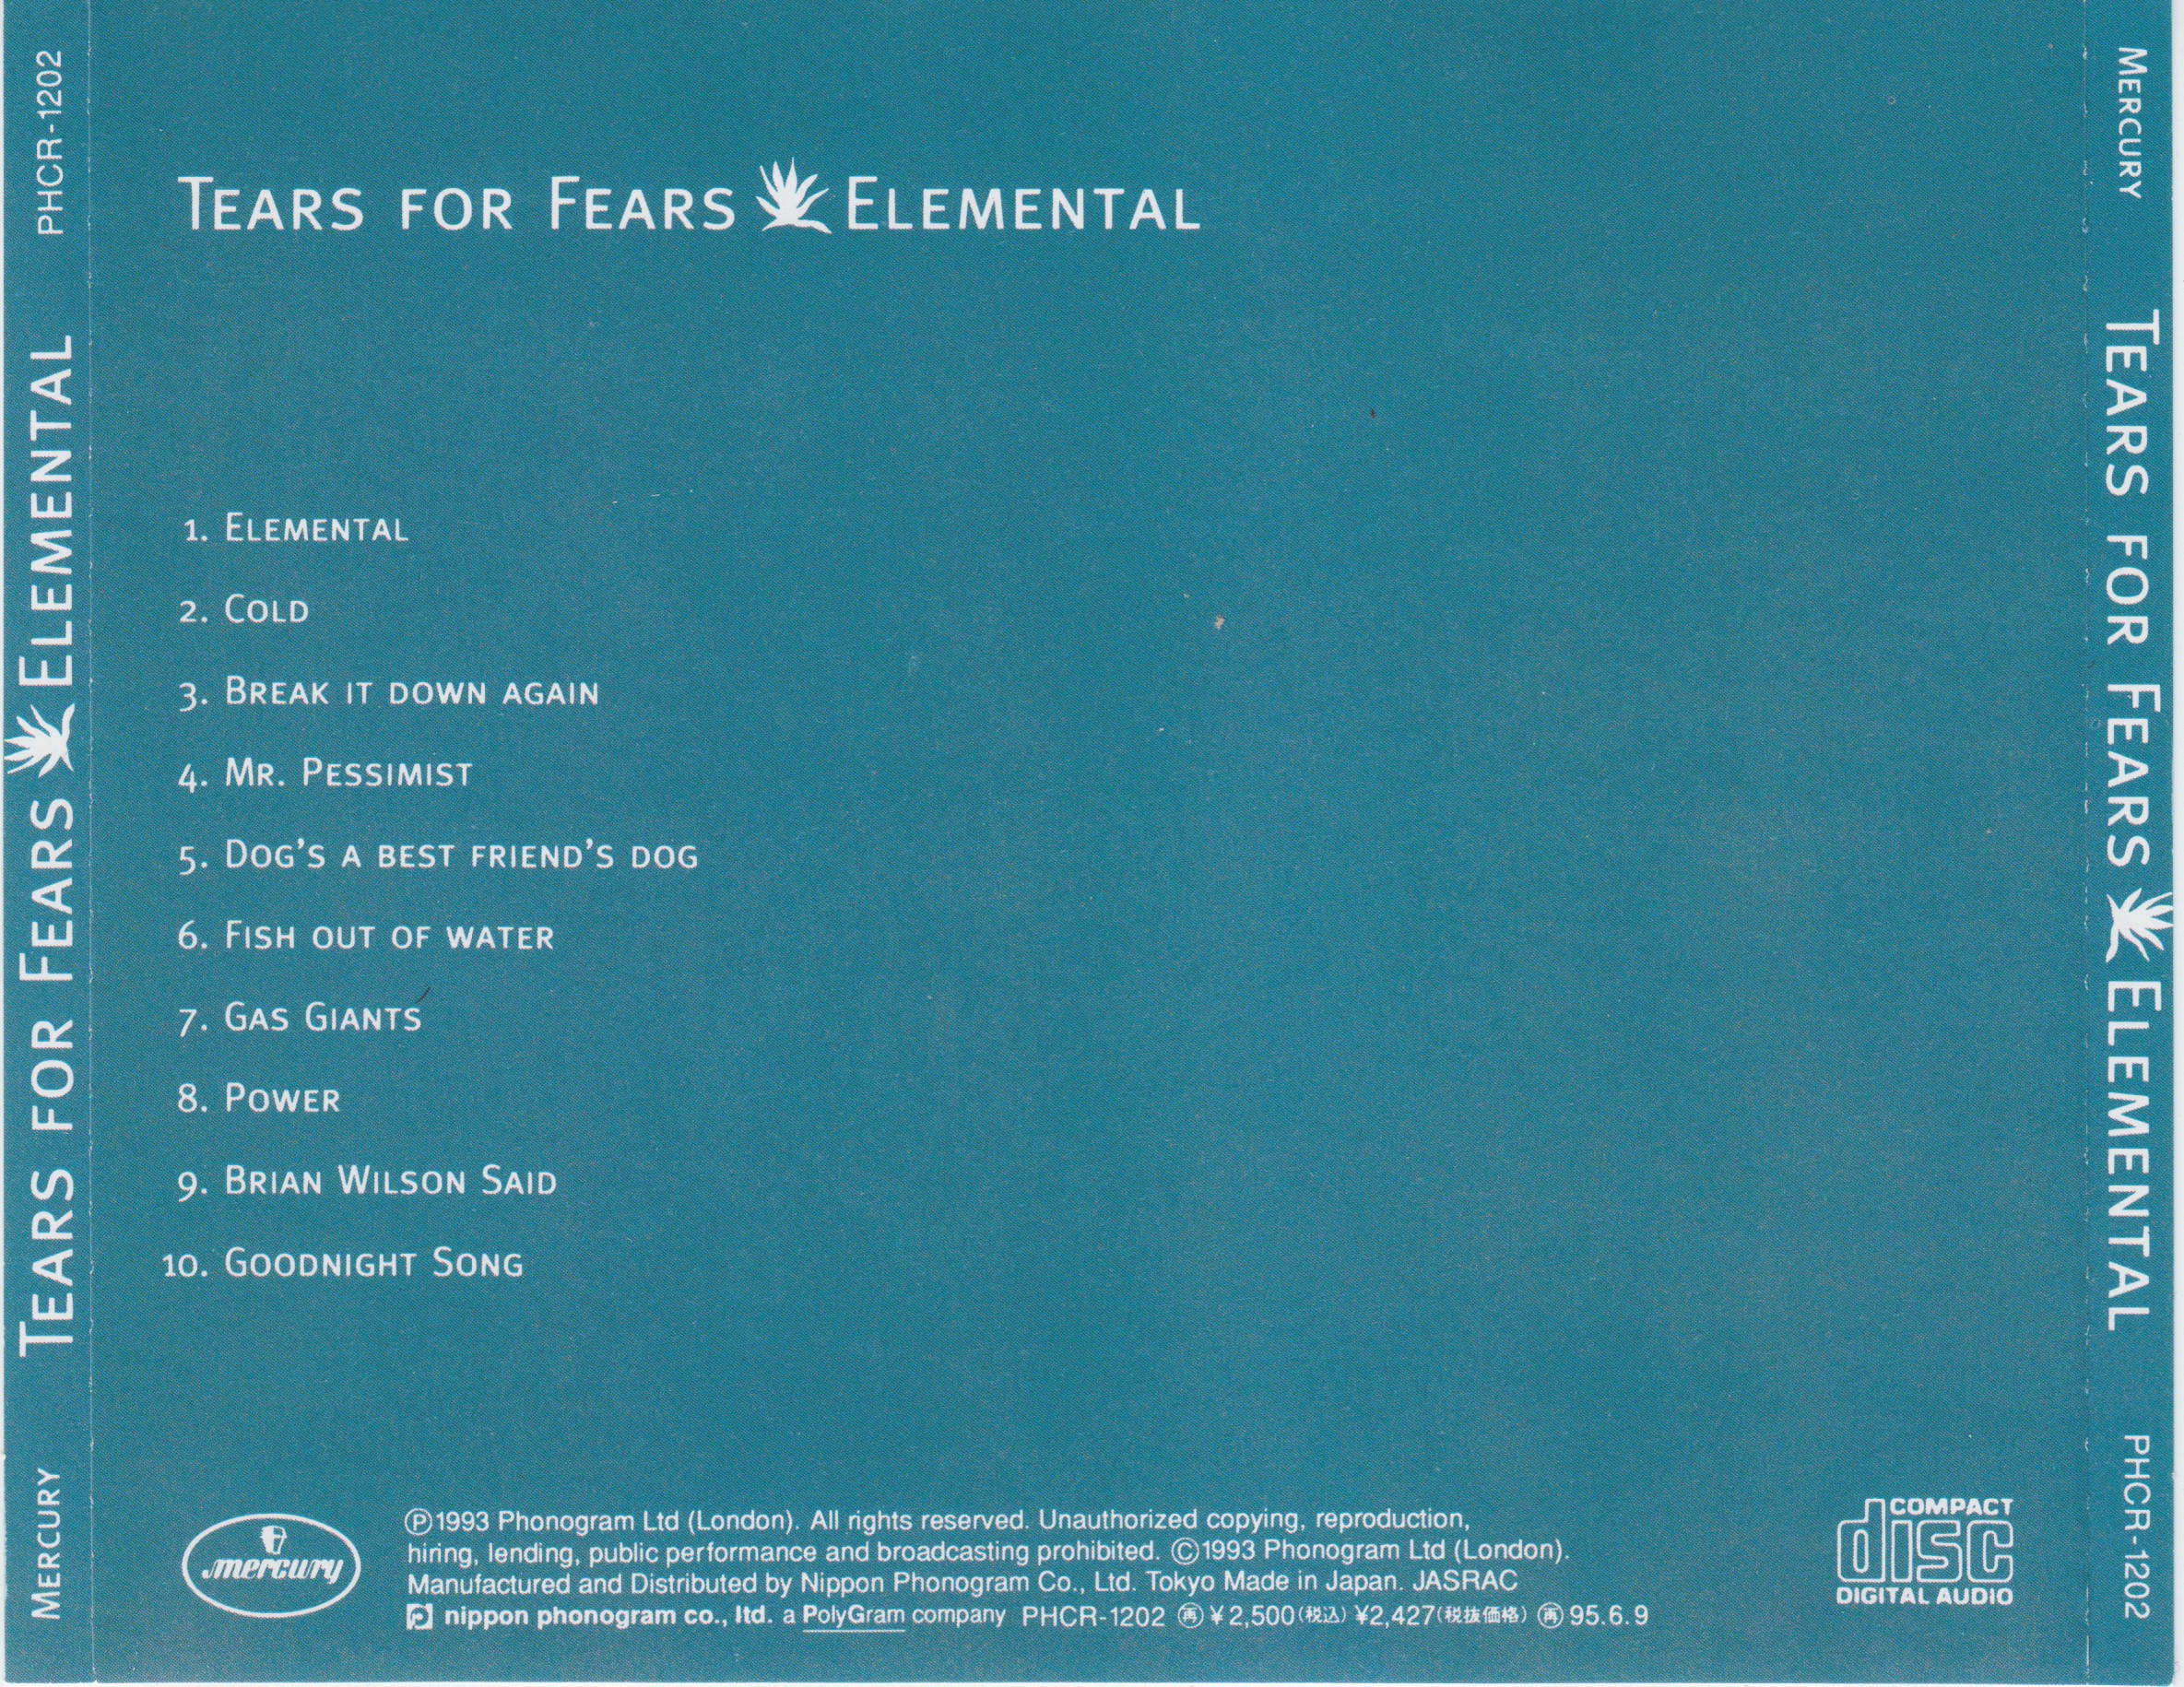 album or cover tears for fears elemental torrent